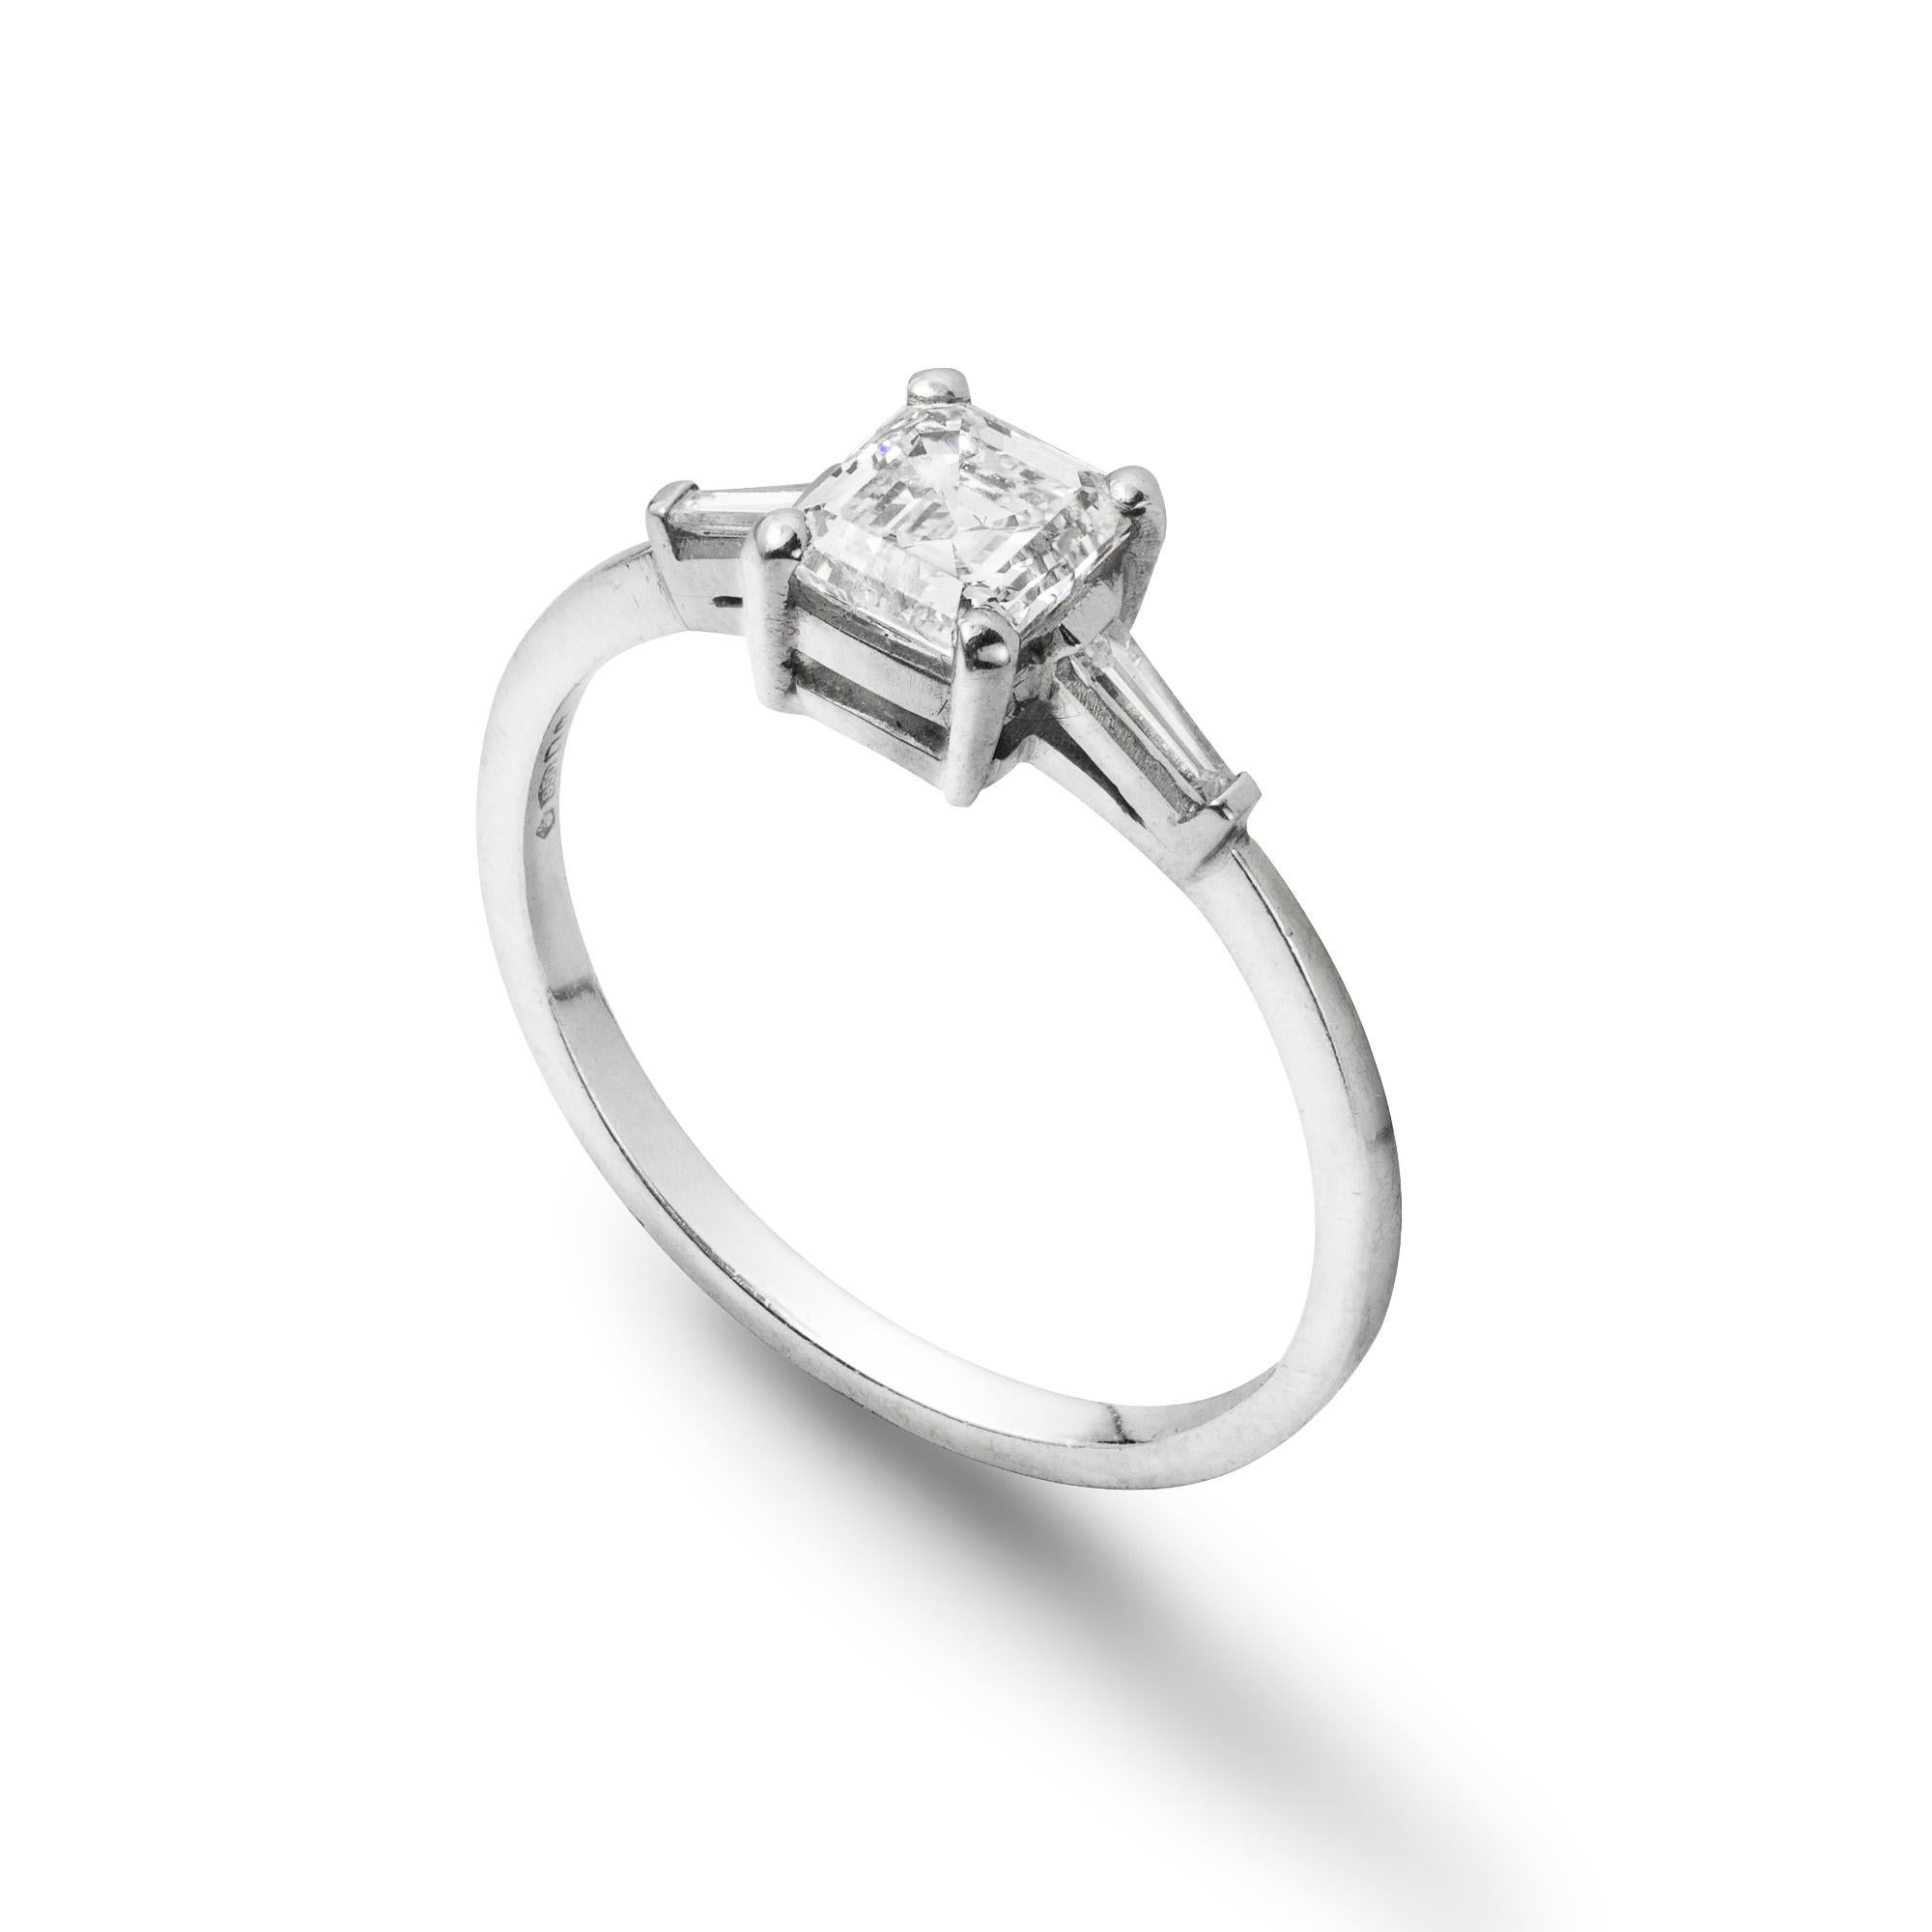 A single stone diamond ring, the Asscher-cut diamond weighing 0.71 carats,accompanied by AnchorCert report, stating to be of G colour, VS2 clarity, set in-between tapered baguette-cut diamond-set shoulders, all claw-set to platinum collets, with